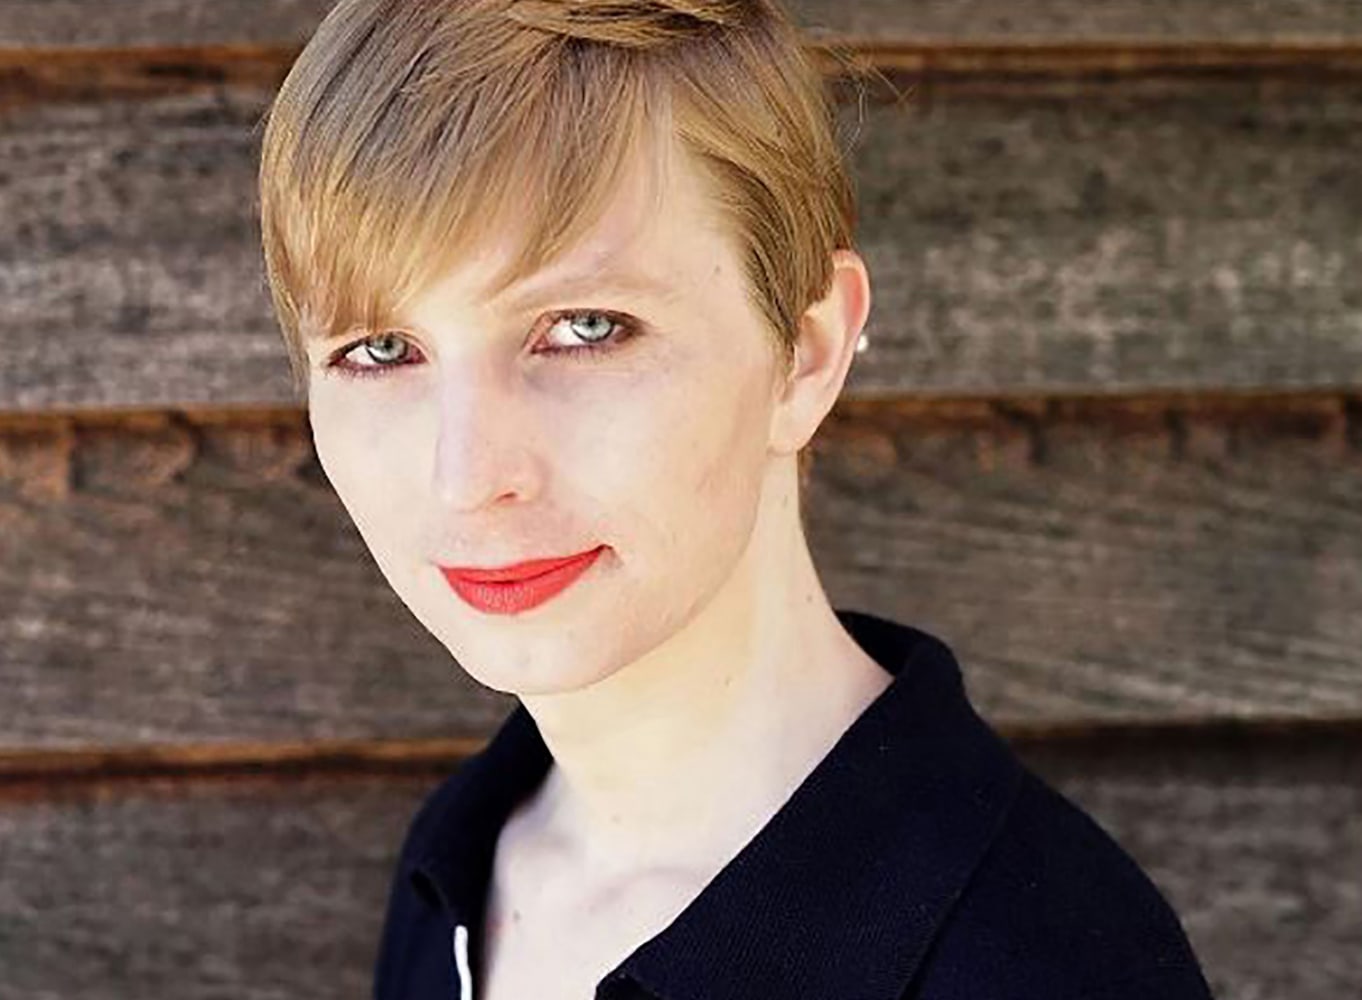 Inside The Mind Of Chelsea Manning: The Courage To Speak Out